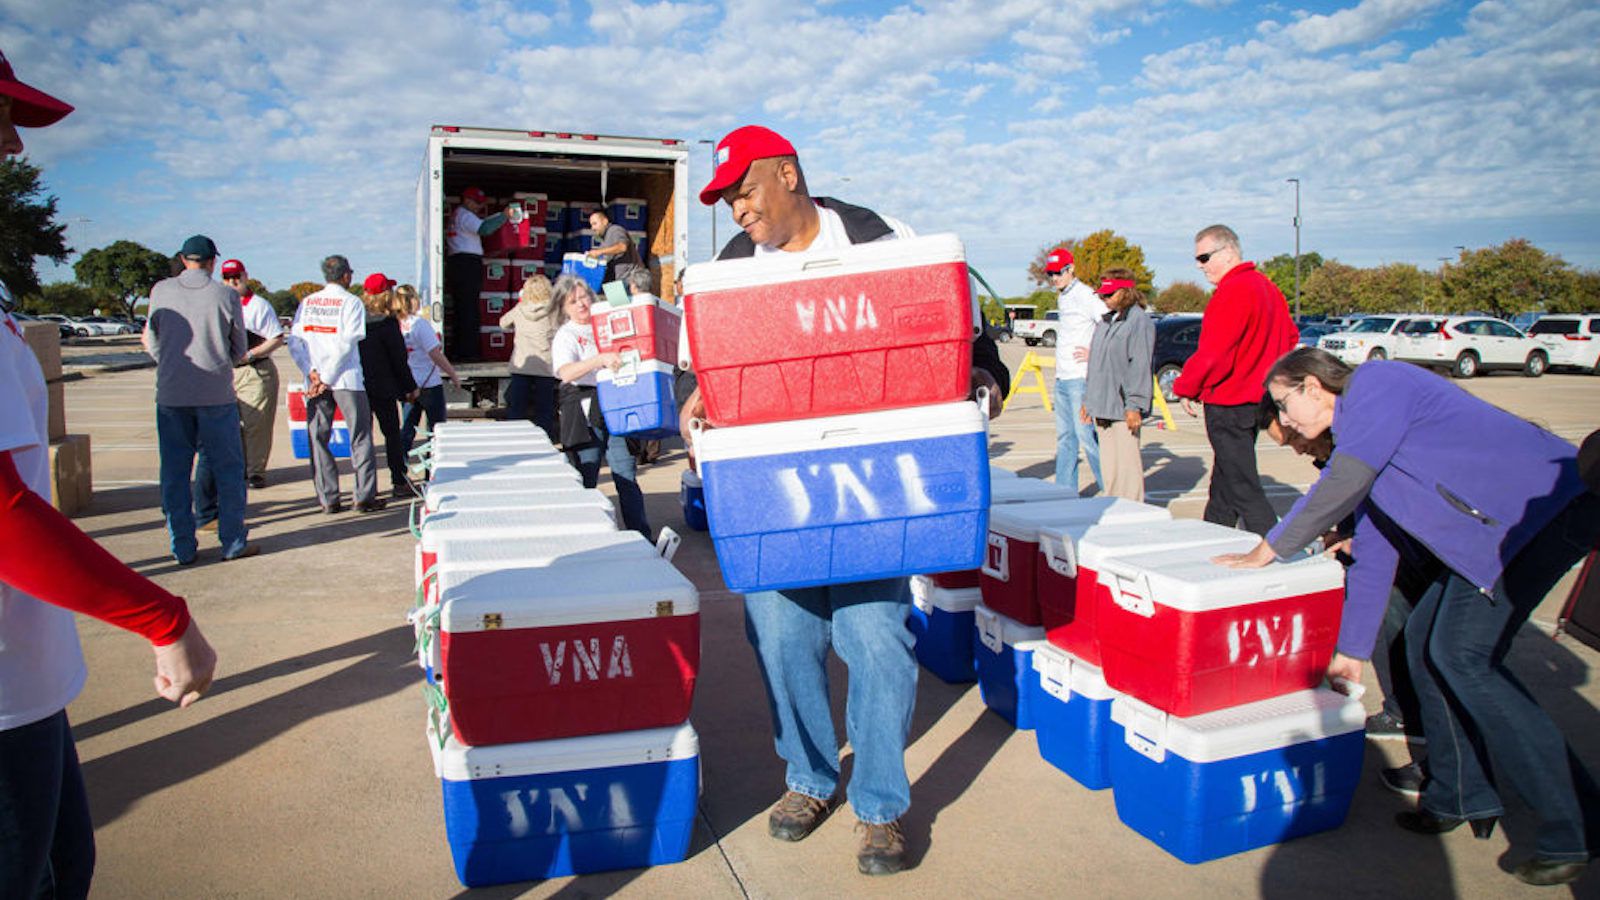 VNA Meals on Wheels volunteers on Giving Tuesday